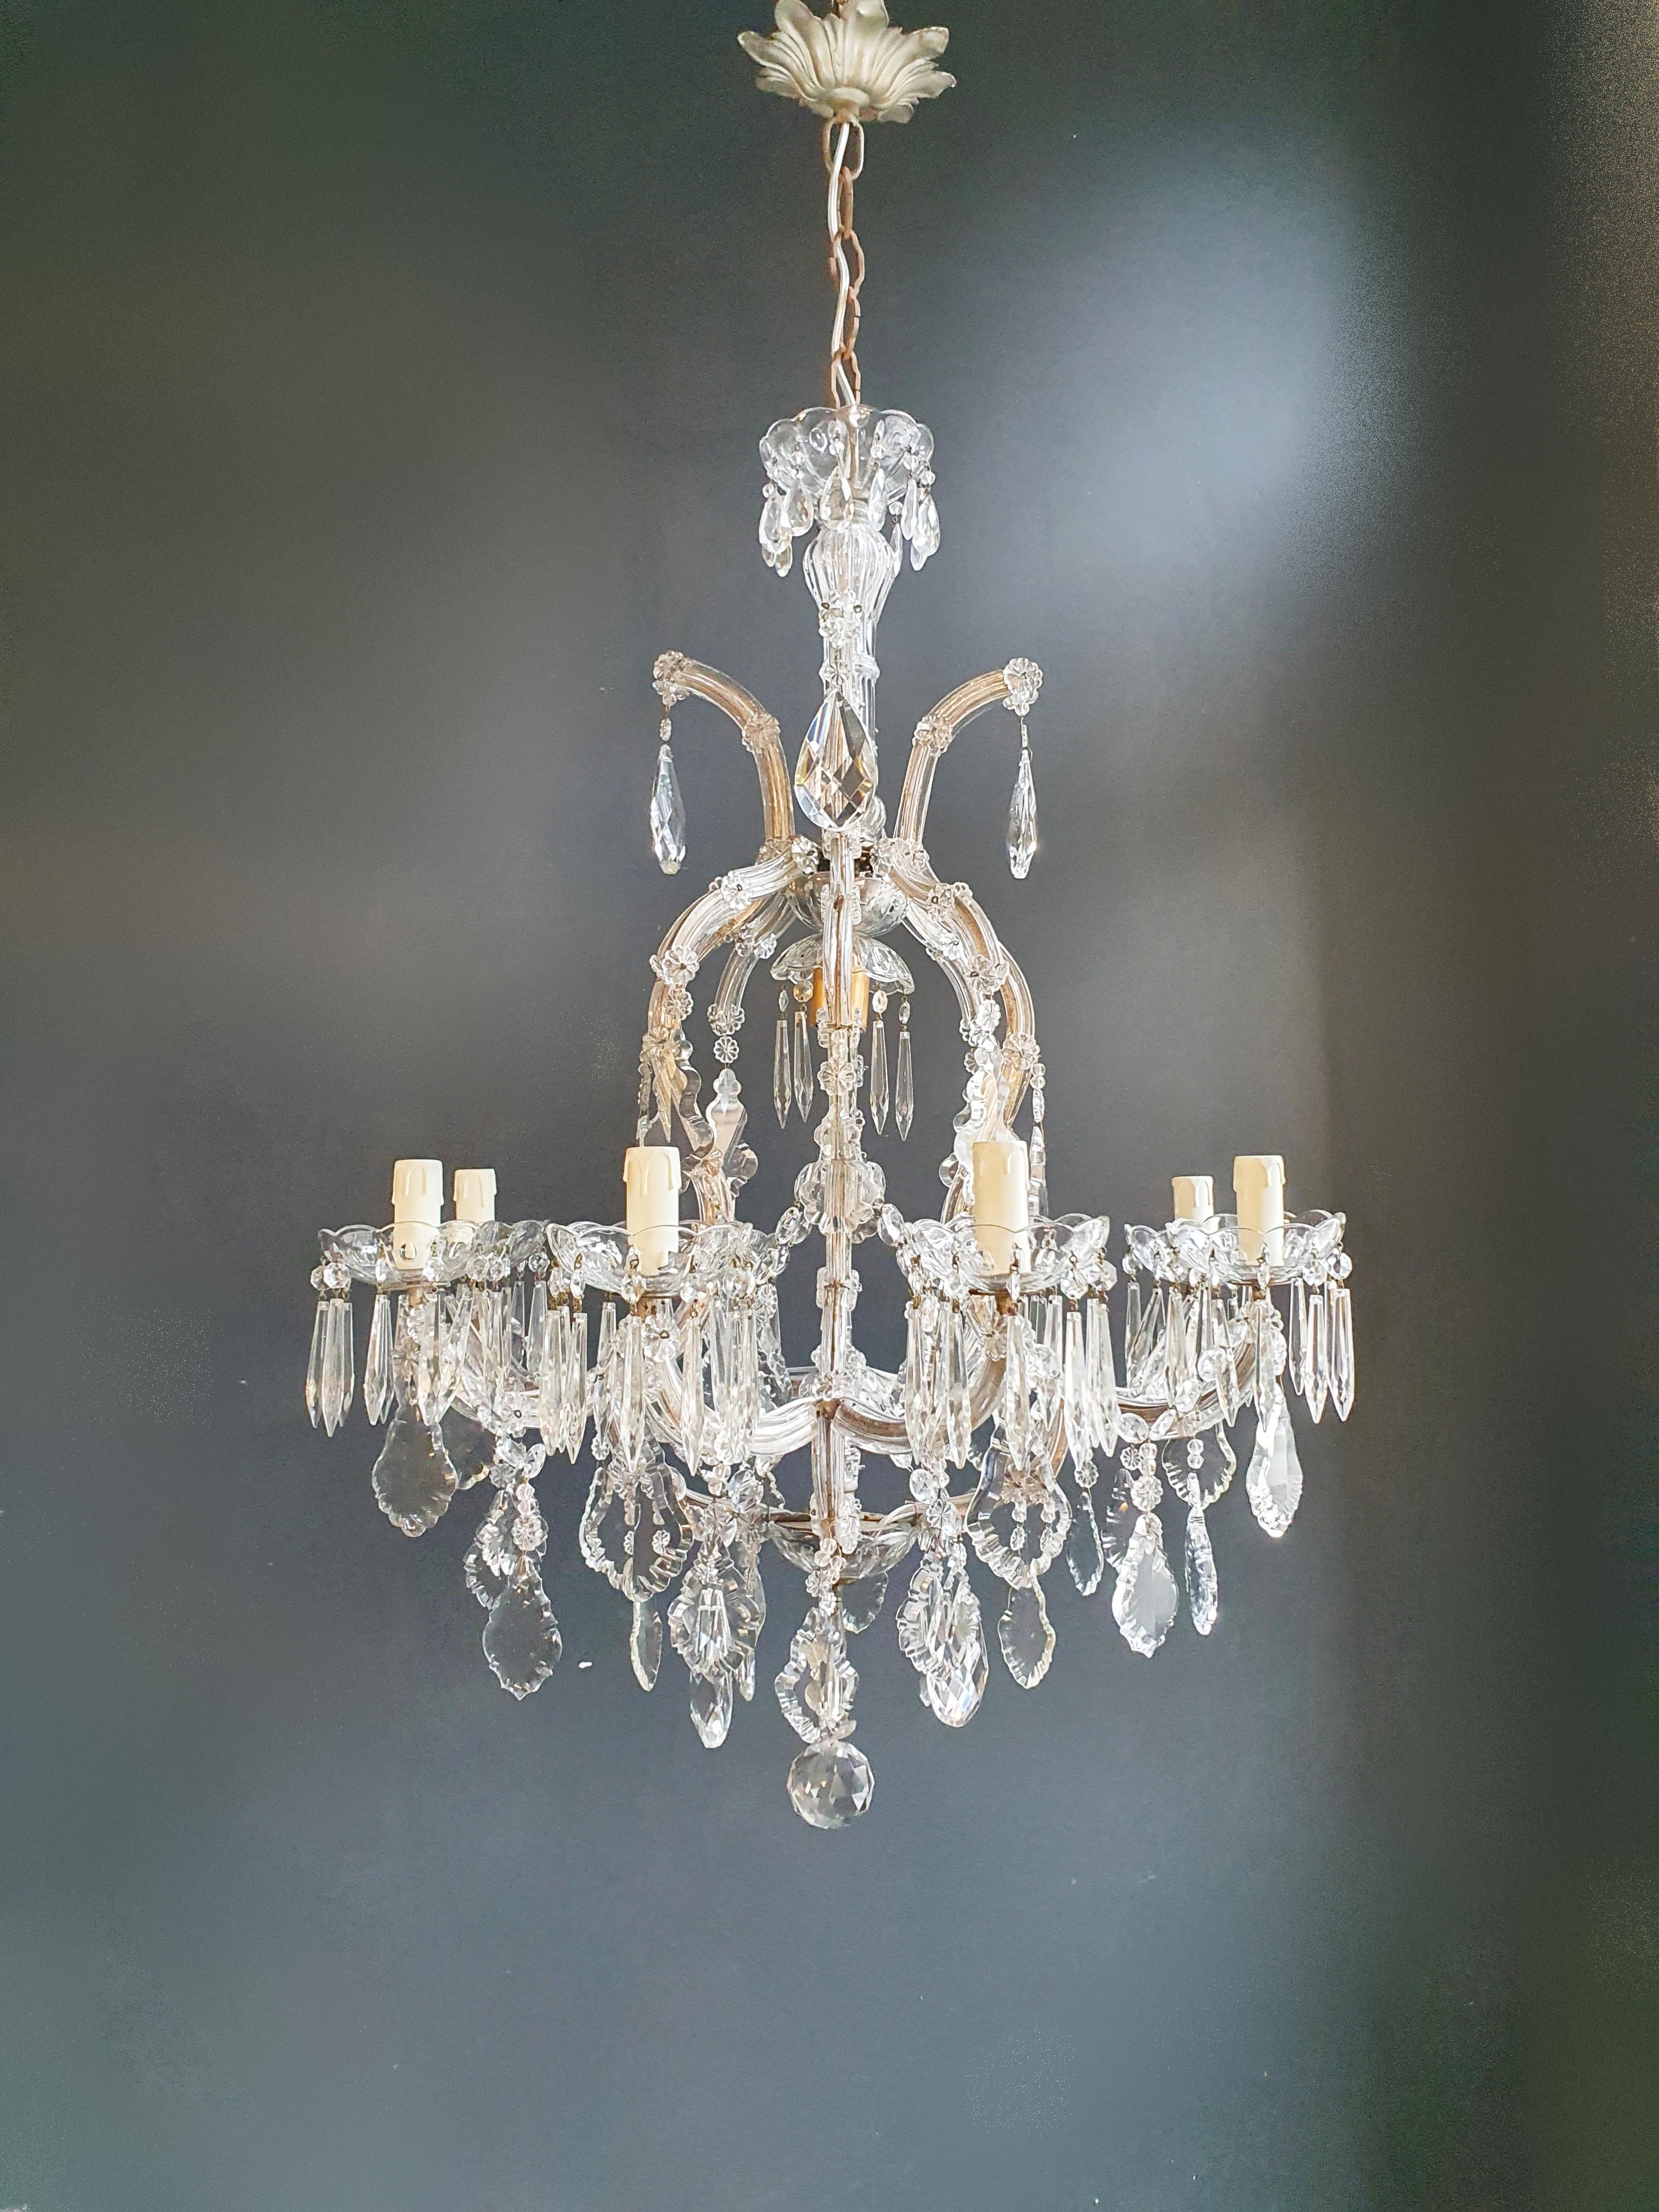 Hand-Knotted Maria Theresa Crystal Chandelier Antique Classic Clear Glass For Sale